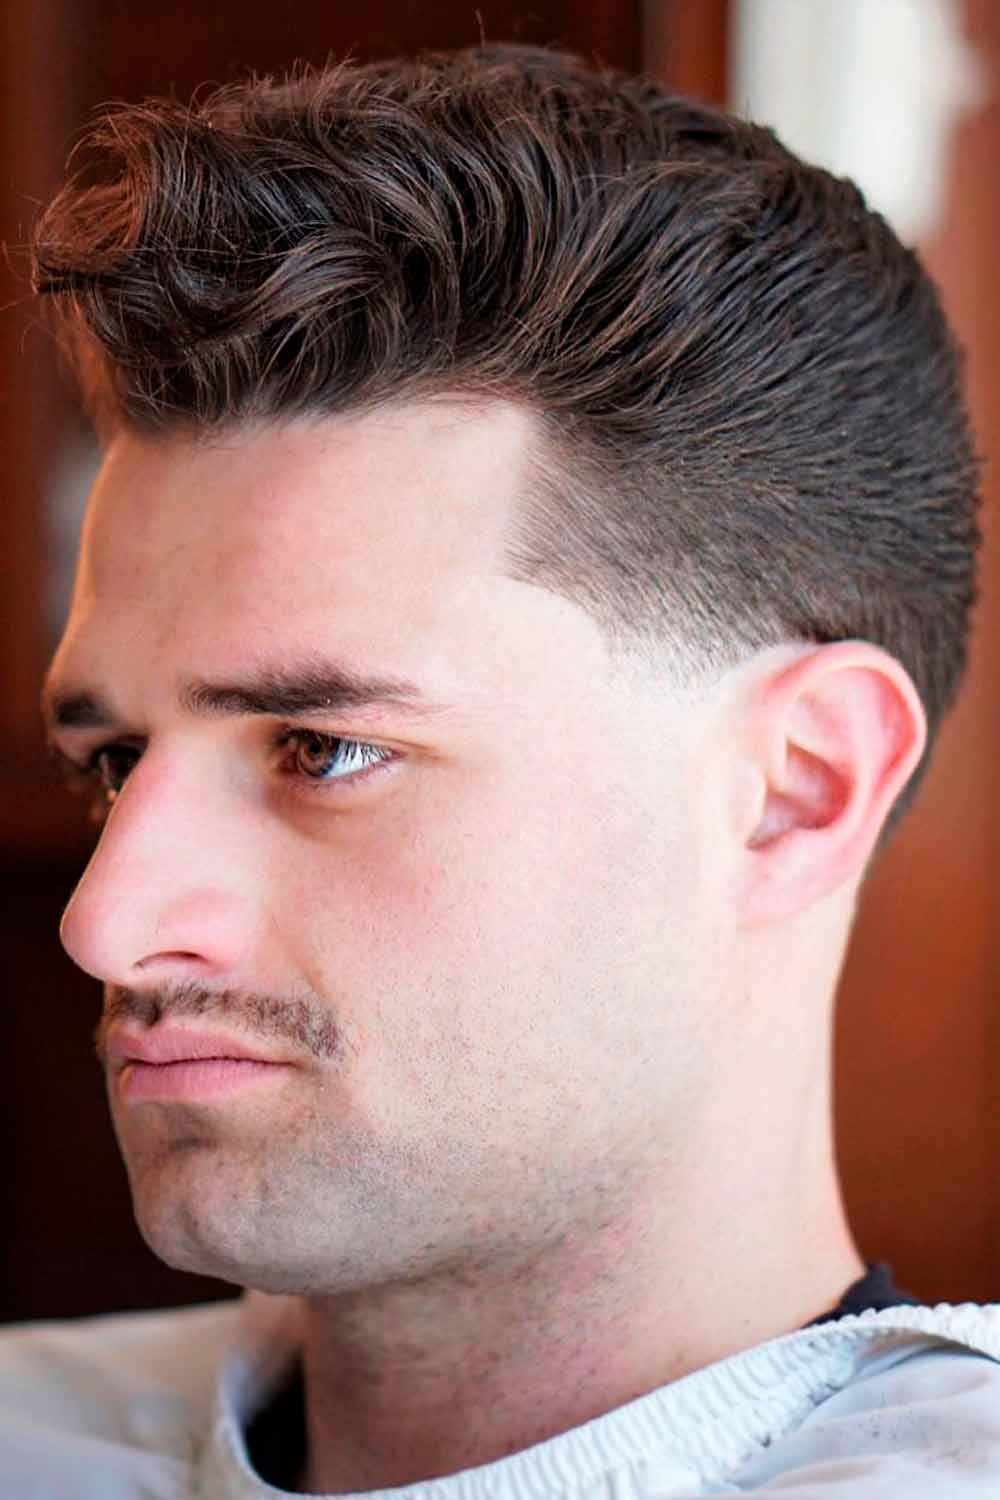 Low Fade Haircut for Wavy Hairstyle #lowtaperfade #lowtaper #lowfade #taperfade #fade #taper